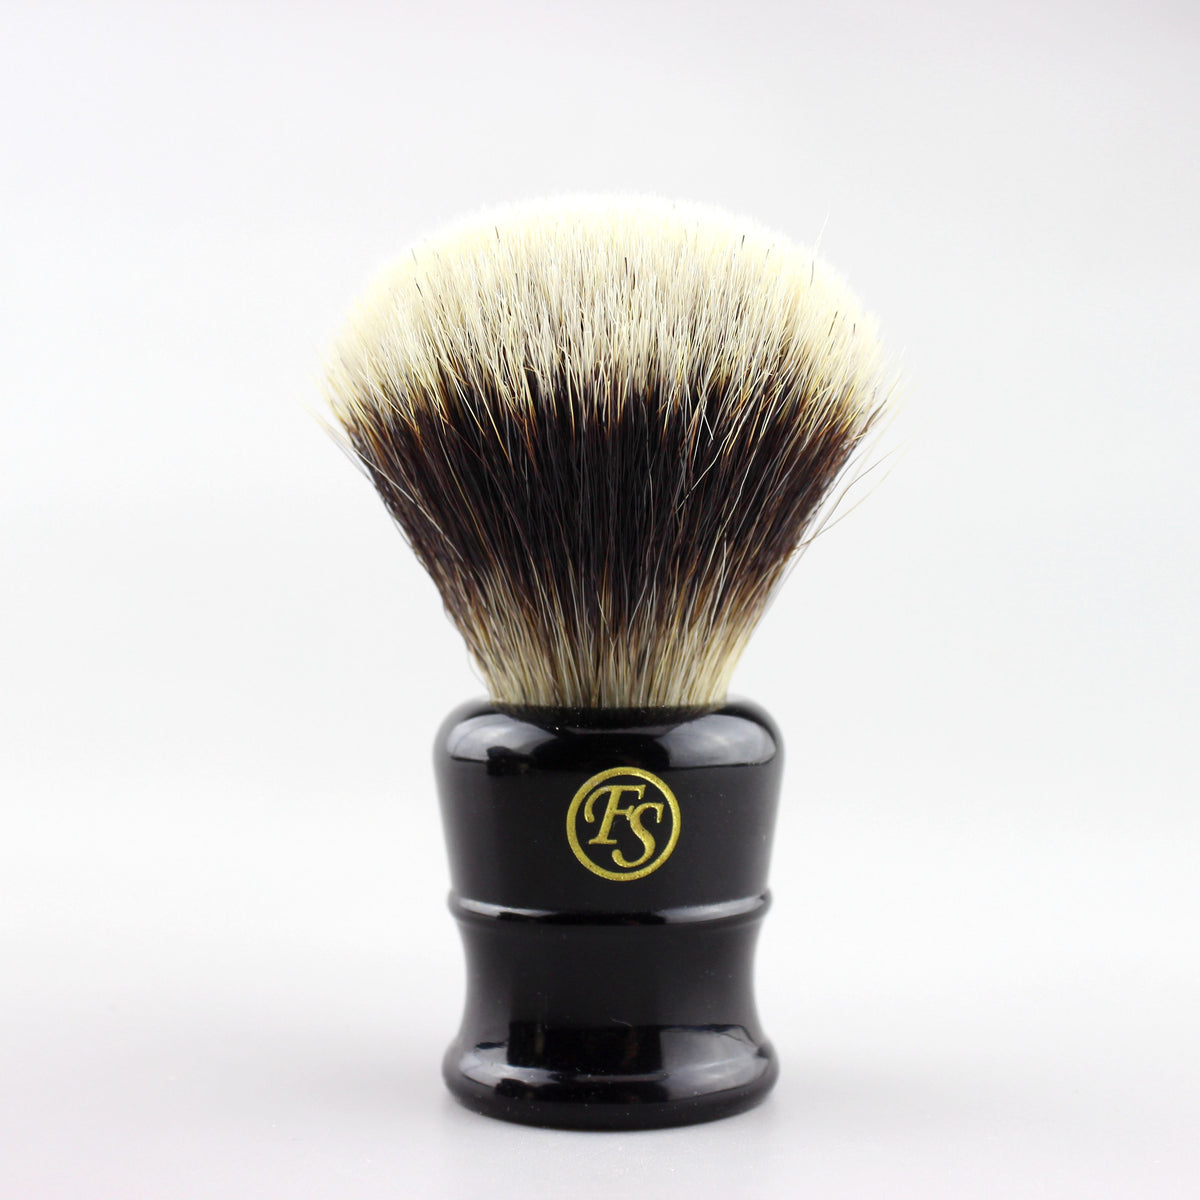 Fine Accoutrements Shave Brush 20mm Super Badger Hair